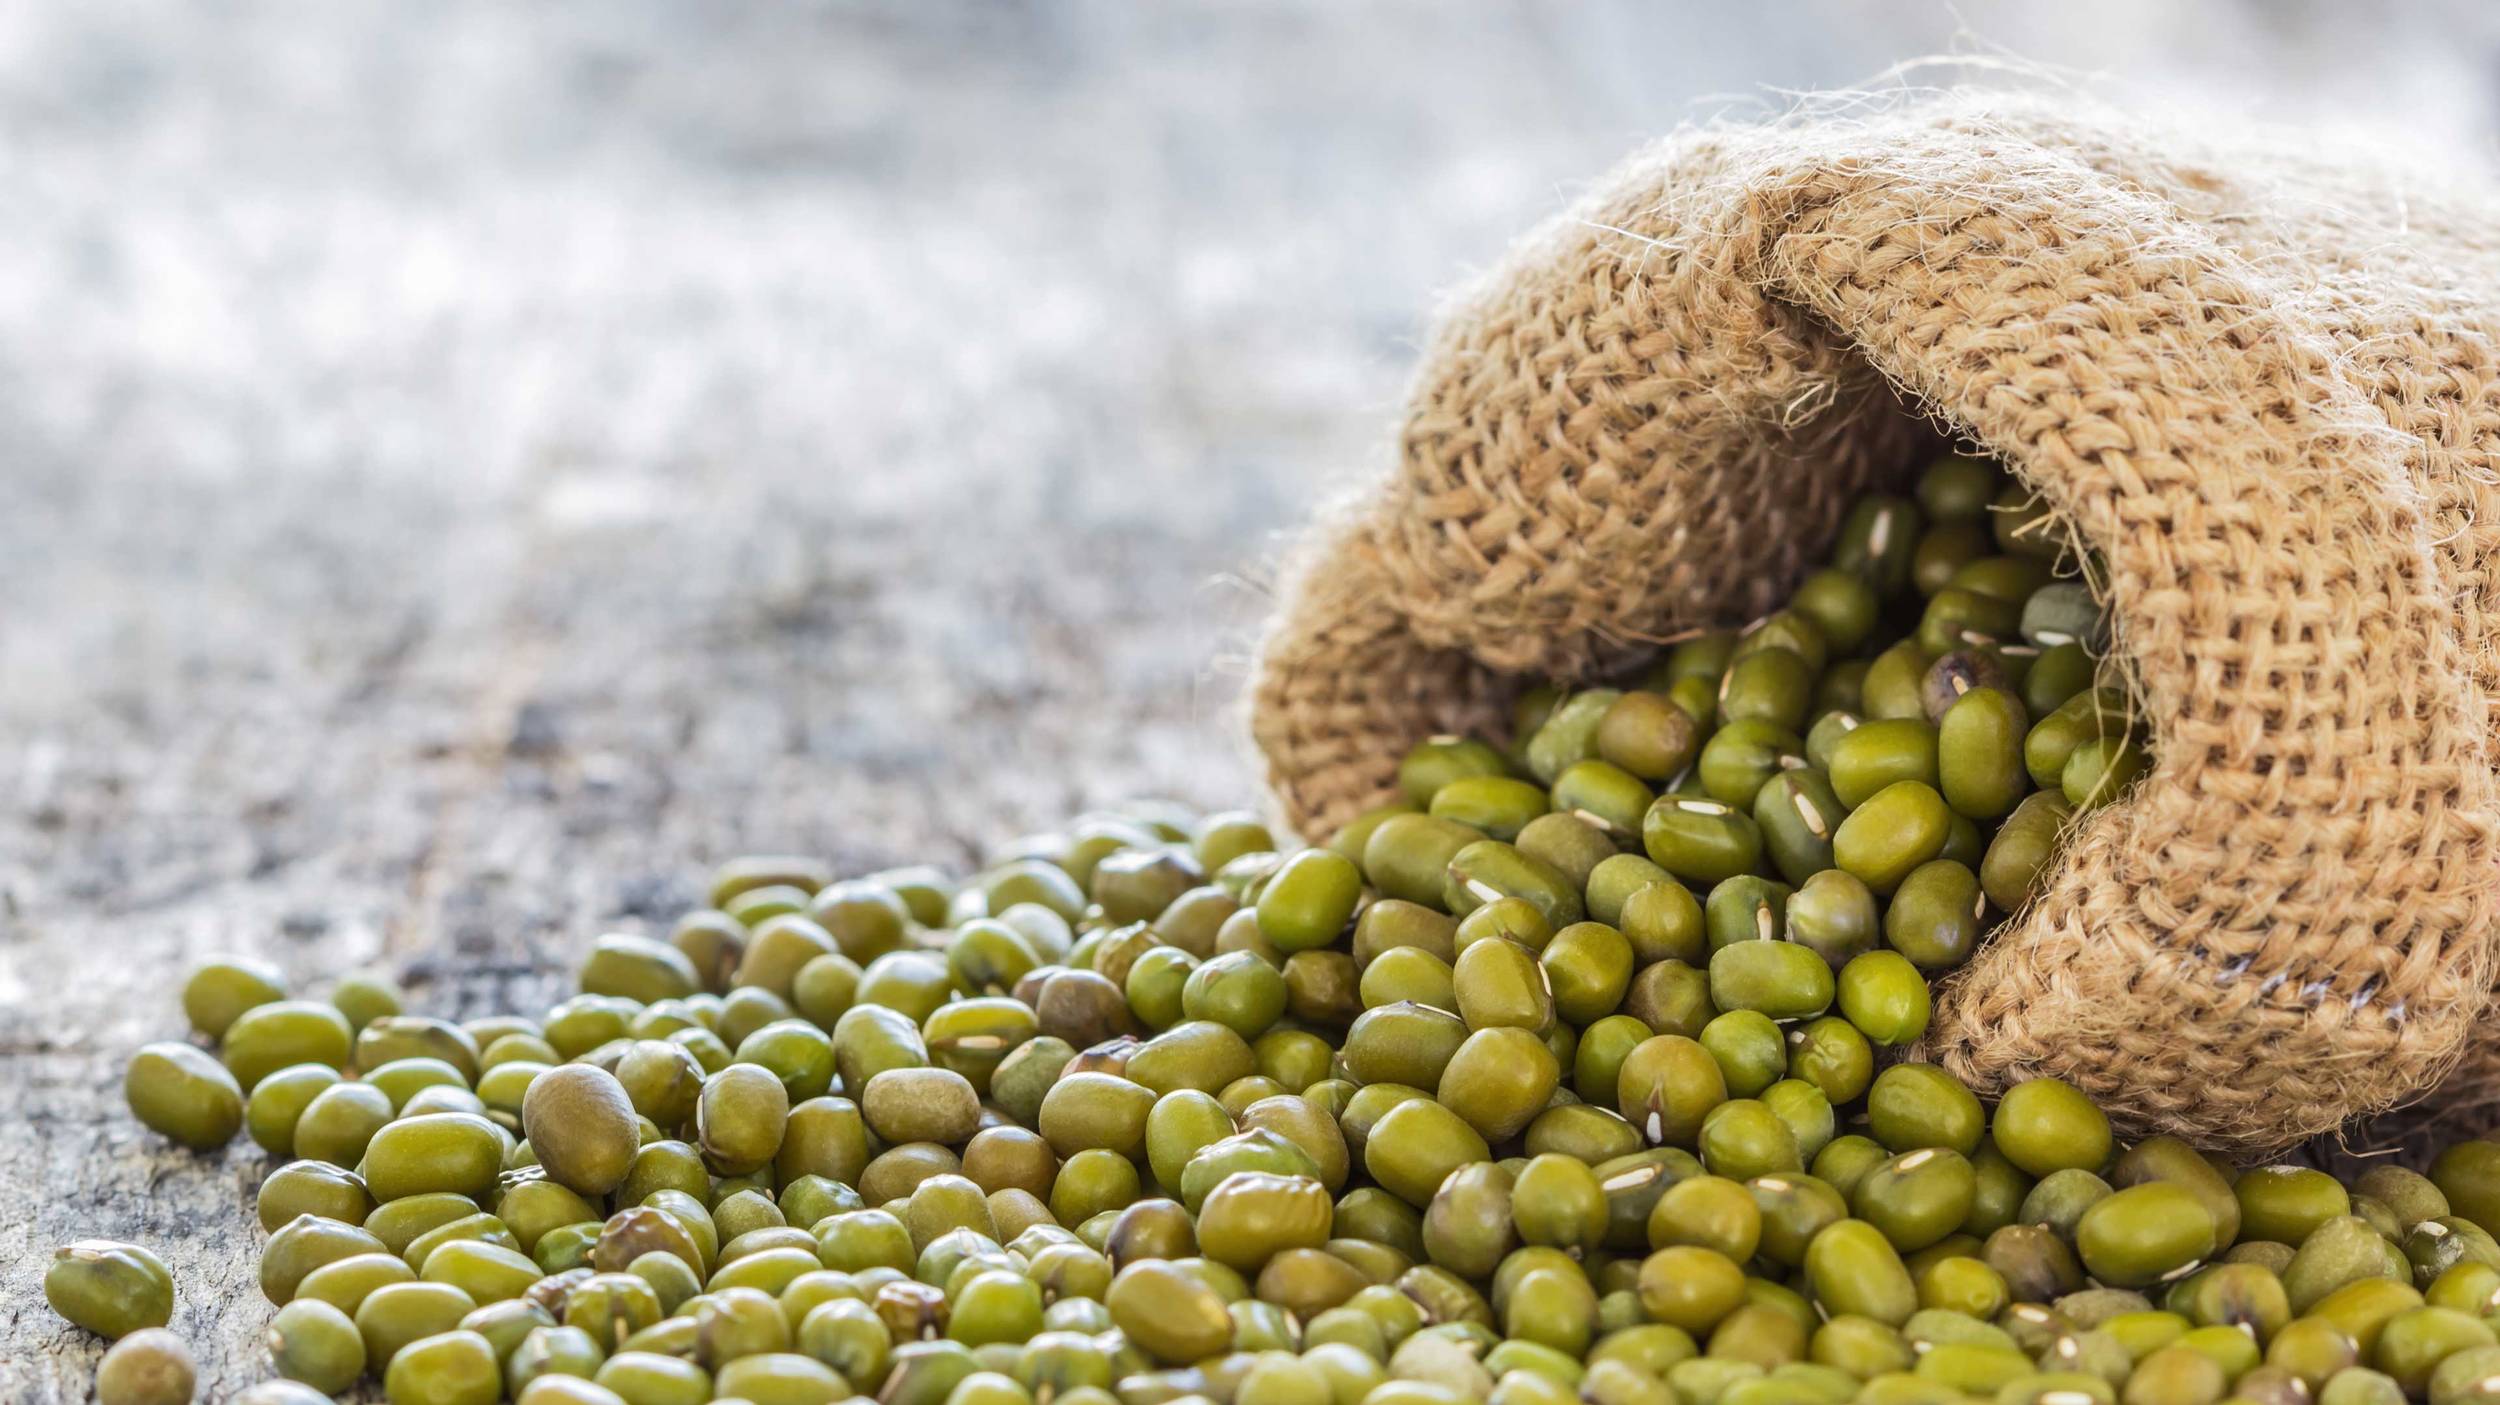 Harvested at their peak, Cono‘s mung beans are carefully processed and packaged to preserve maximum goodness, ready to be delivered to countries worldwide.